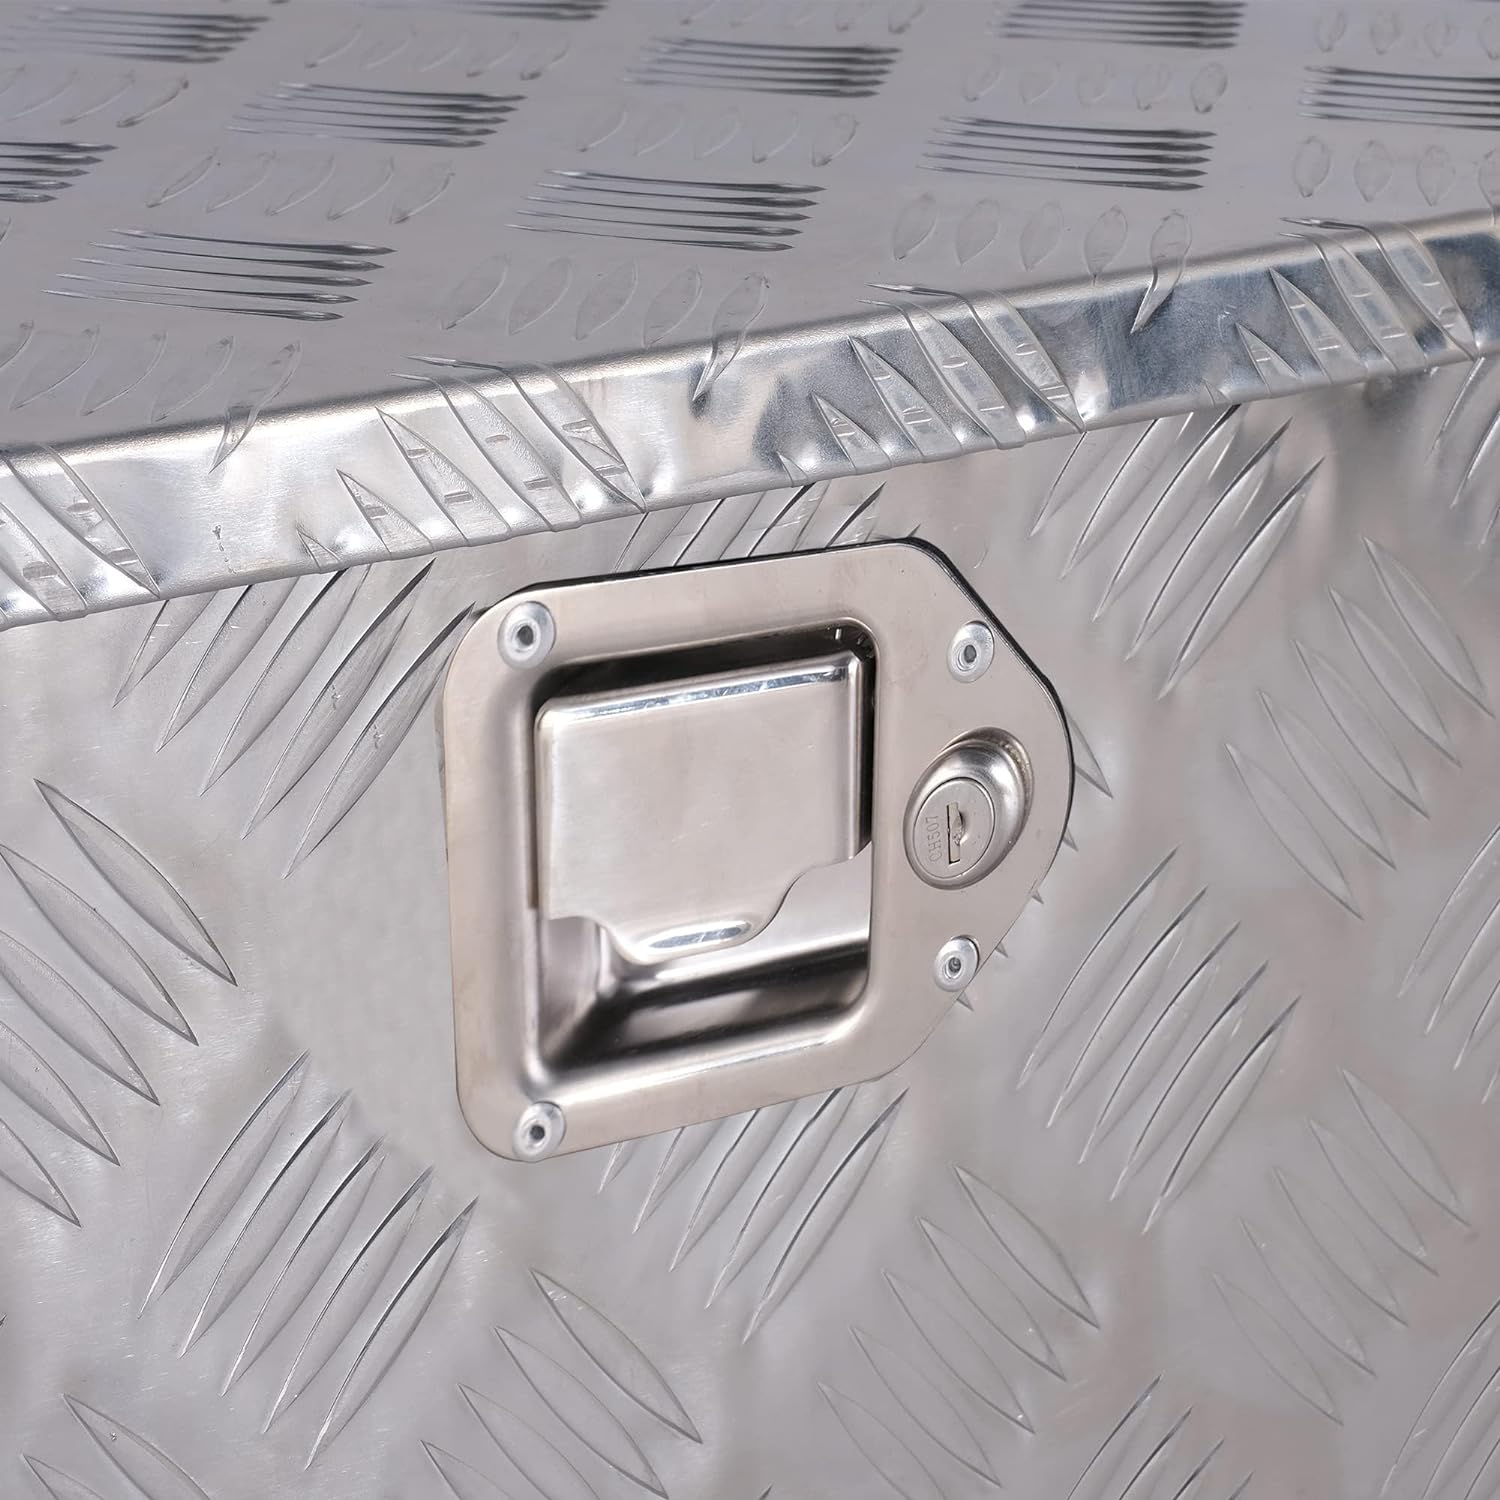 Aluminum Car Tools Storage Box with Lock for Pick Up Truck Truck Bed, Silver | karmasfar.com